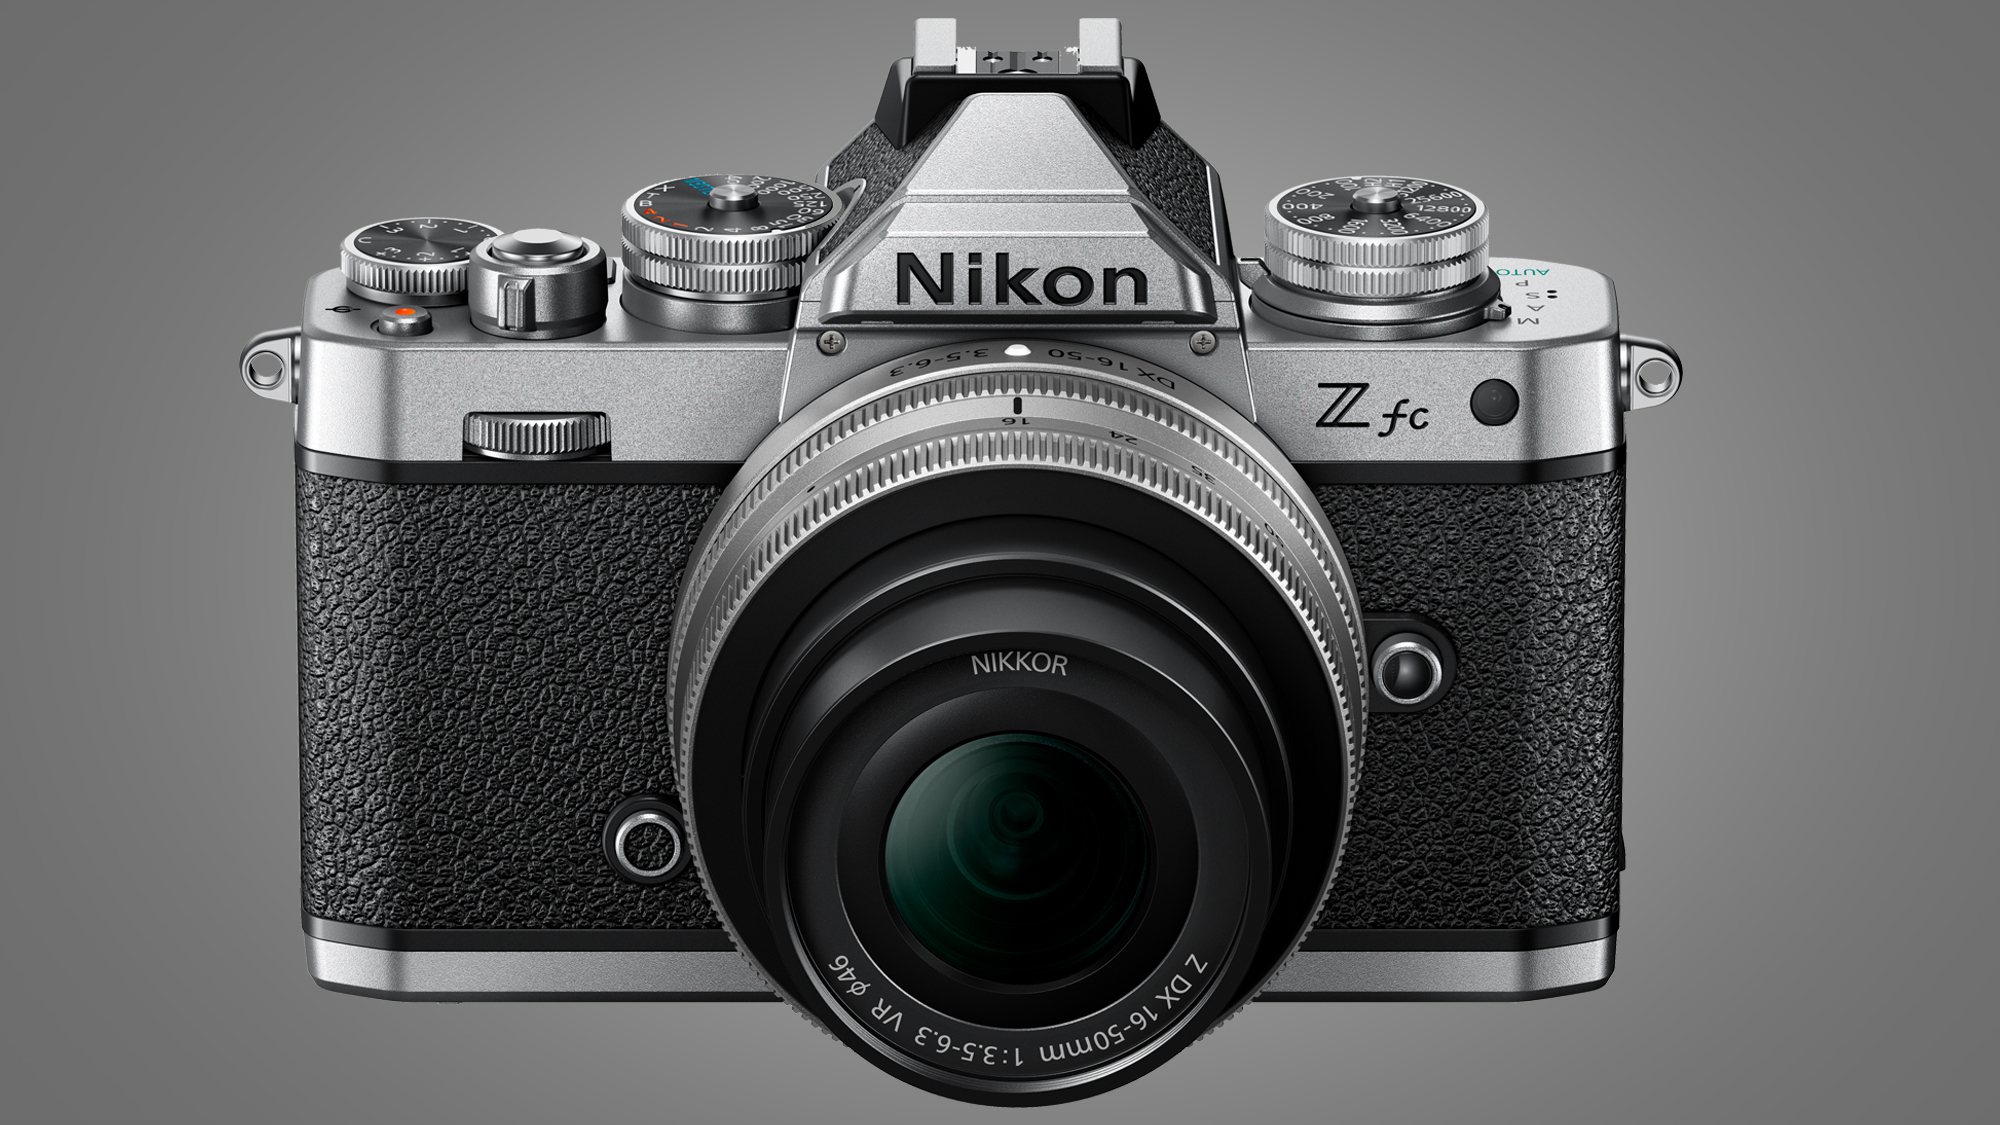 Nikon Zfc is a mirrorless reincarnation of one of the best film